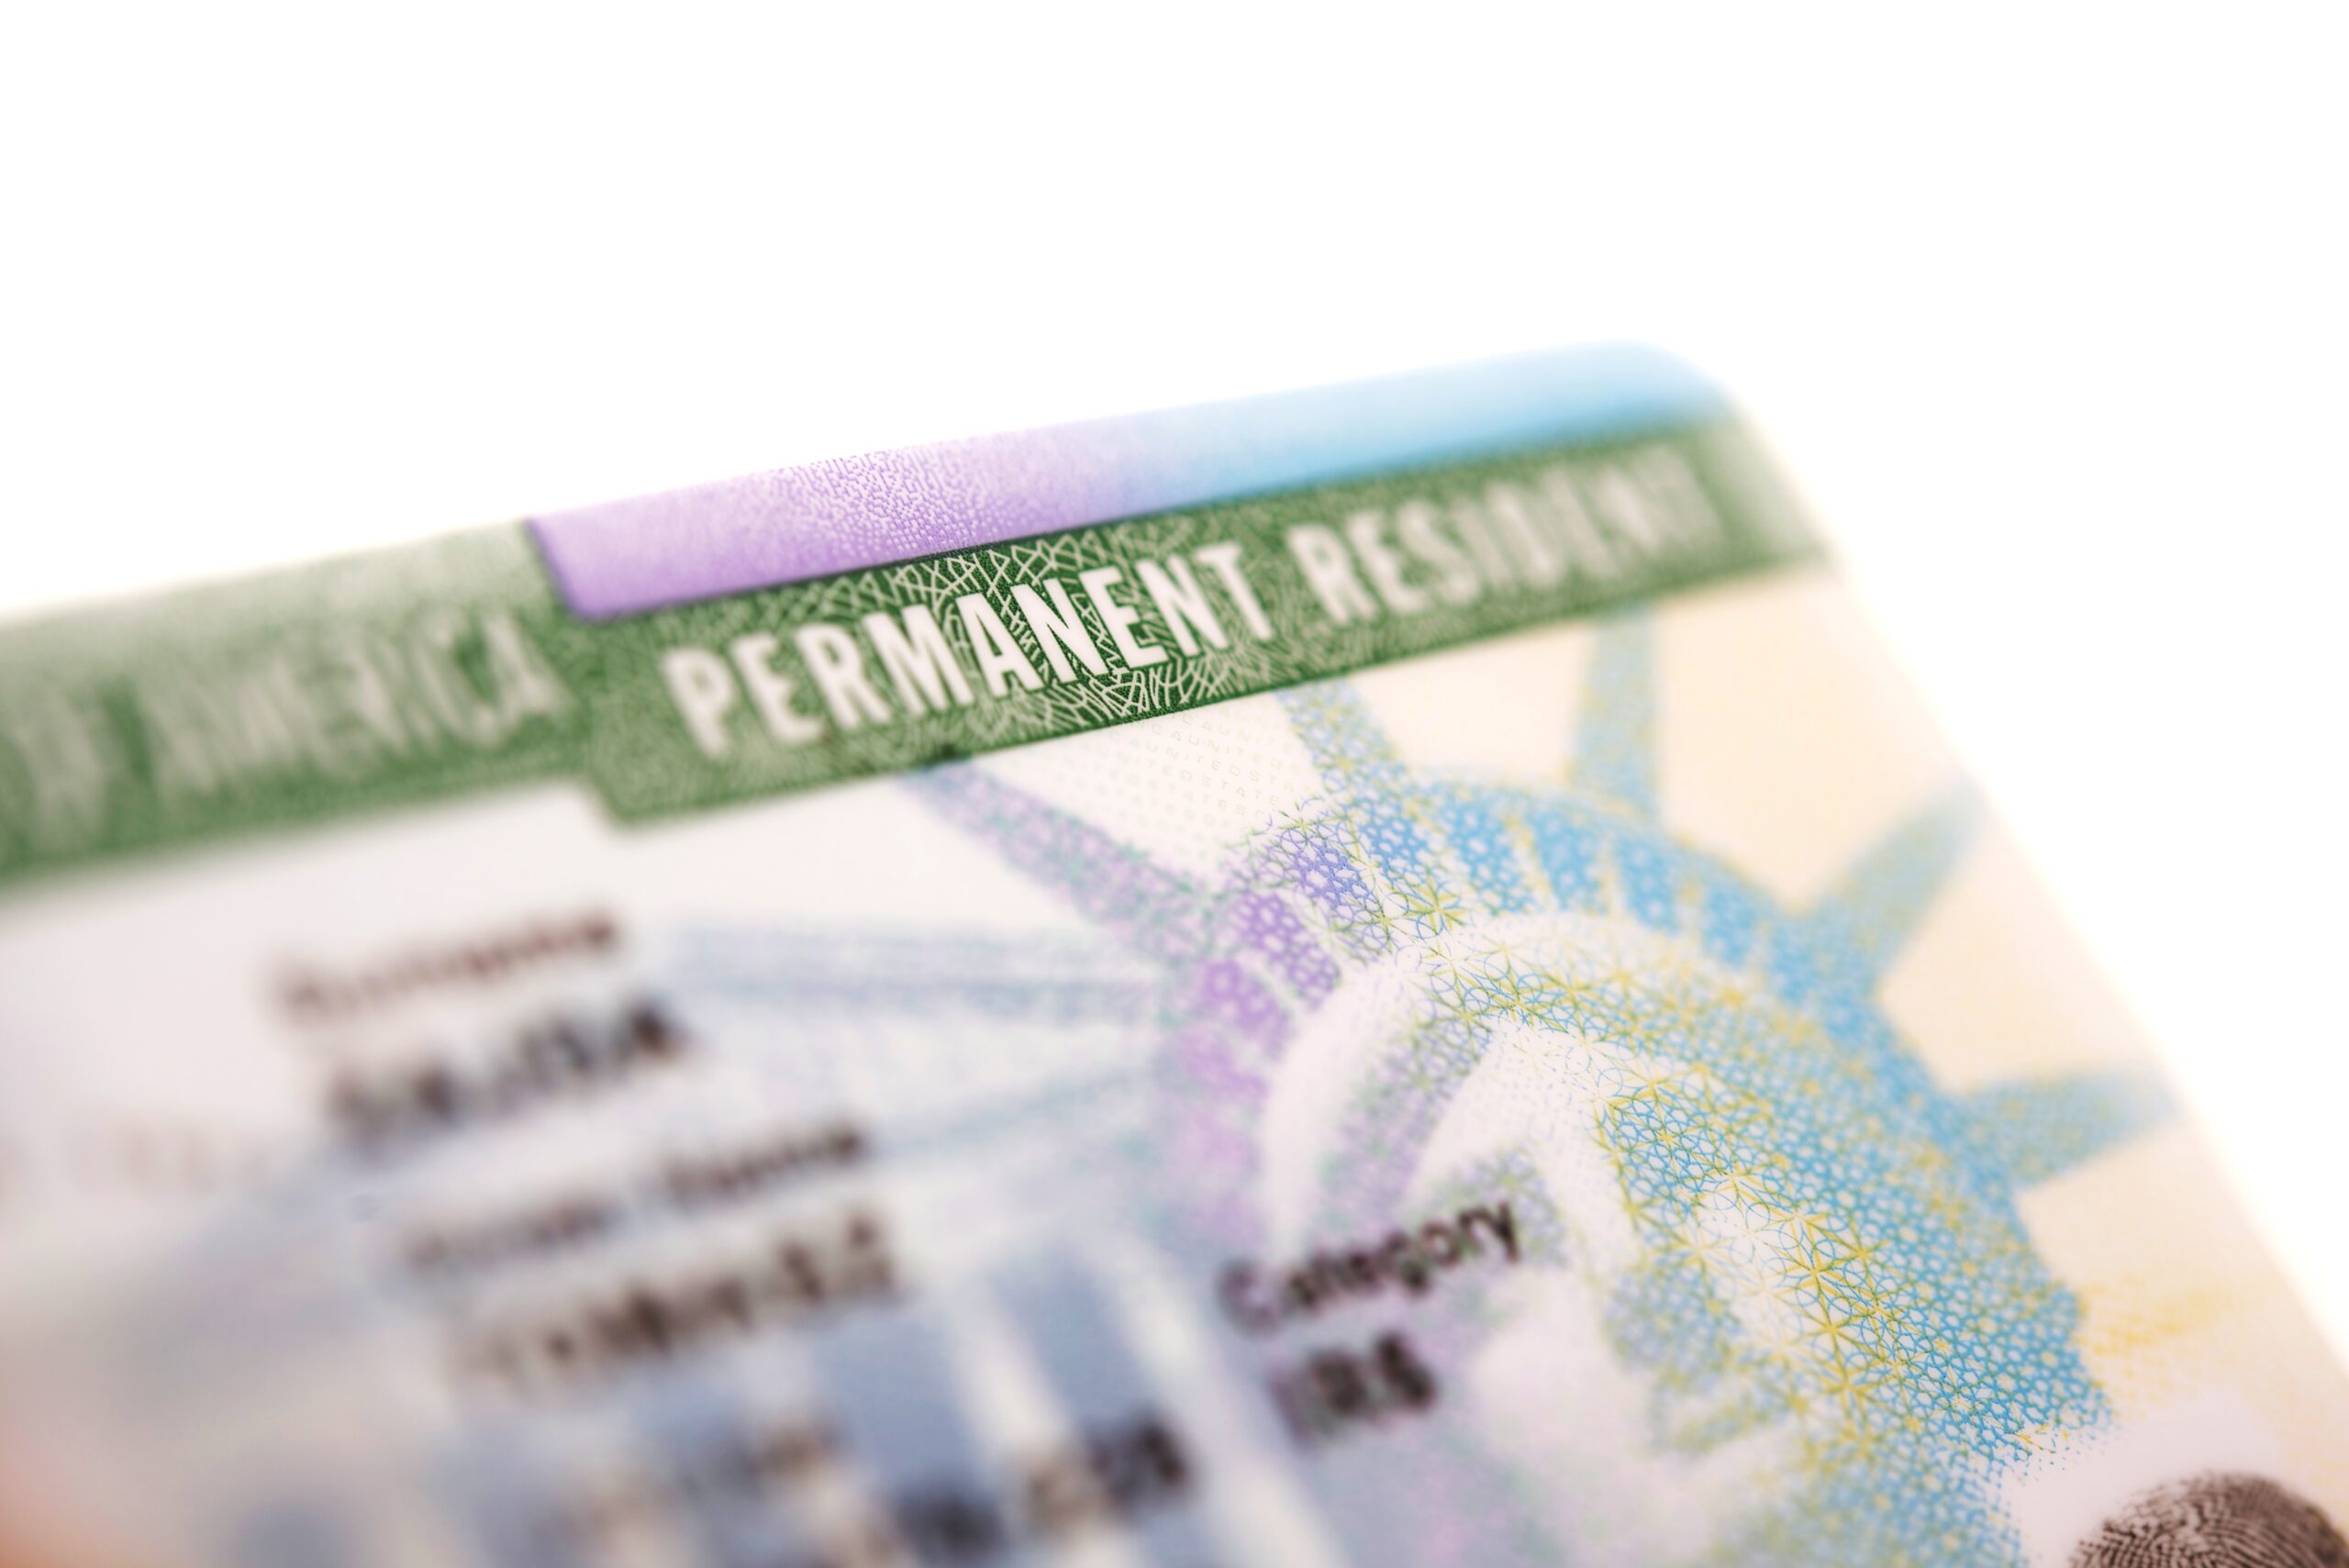 Learn how to get your green card through employment